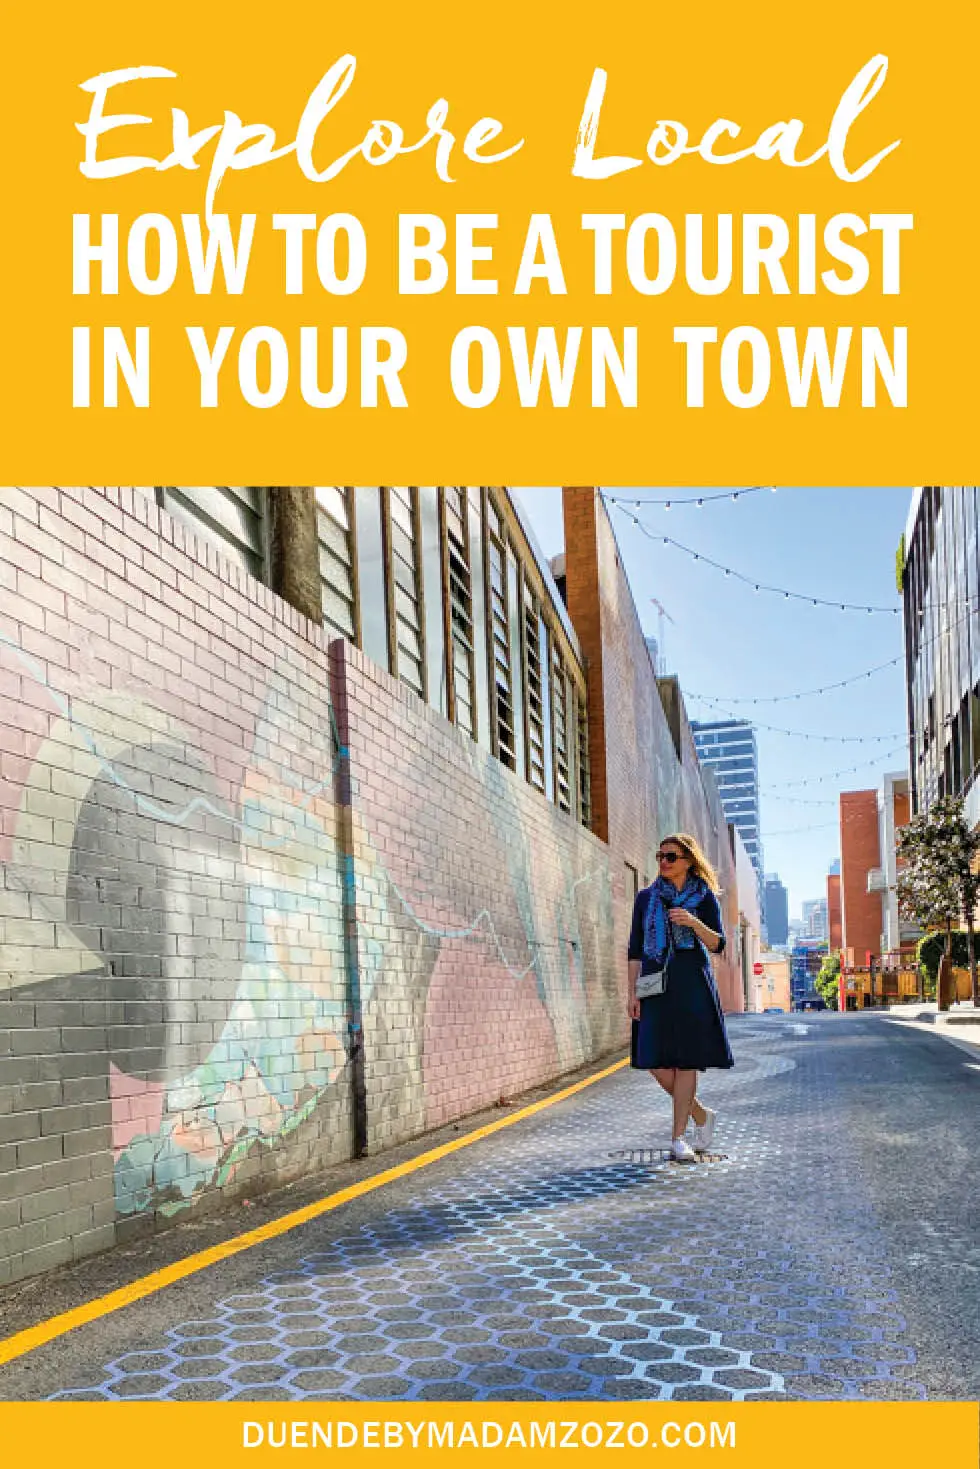 Image of woman standing in alleyway with street art and text overlay reading "Explore Local - How to be a Tourist in Your Own Town"